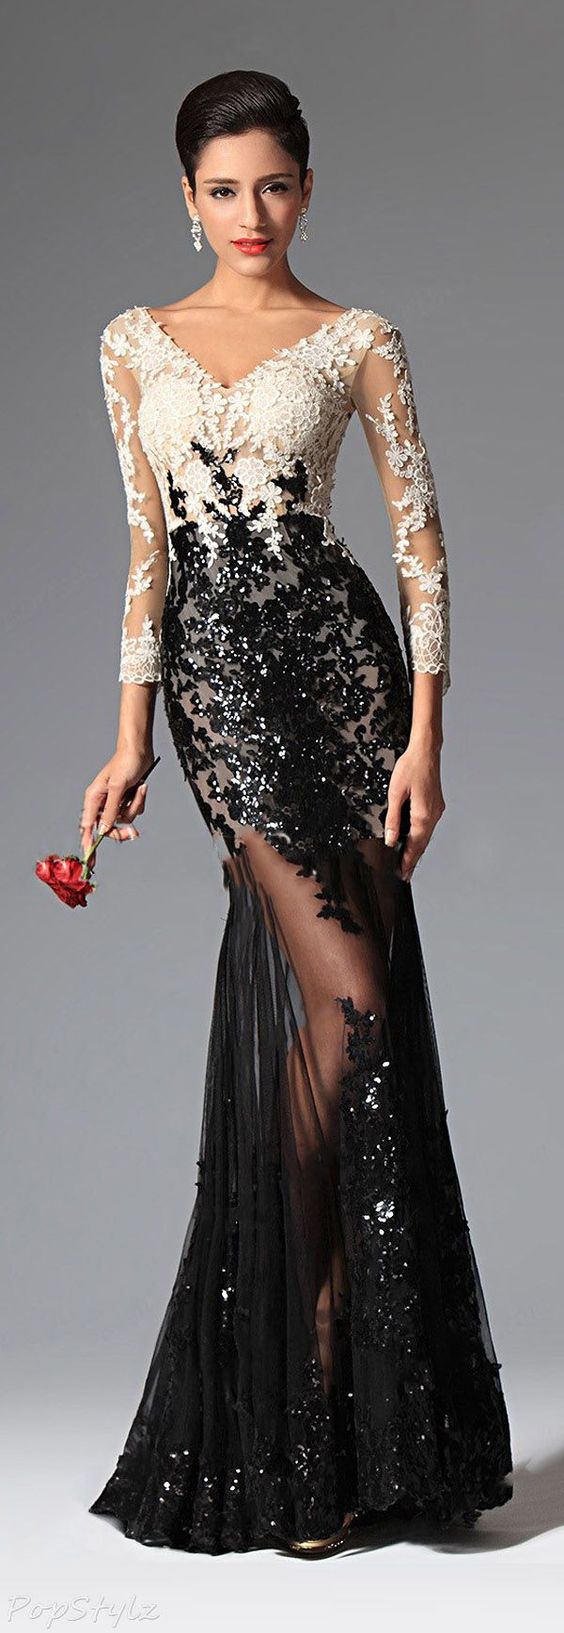 Check out these beutiful prom dresses.